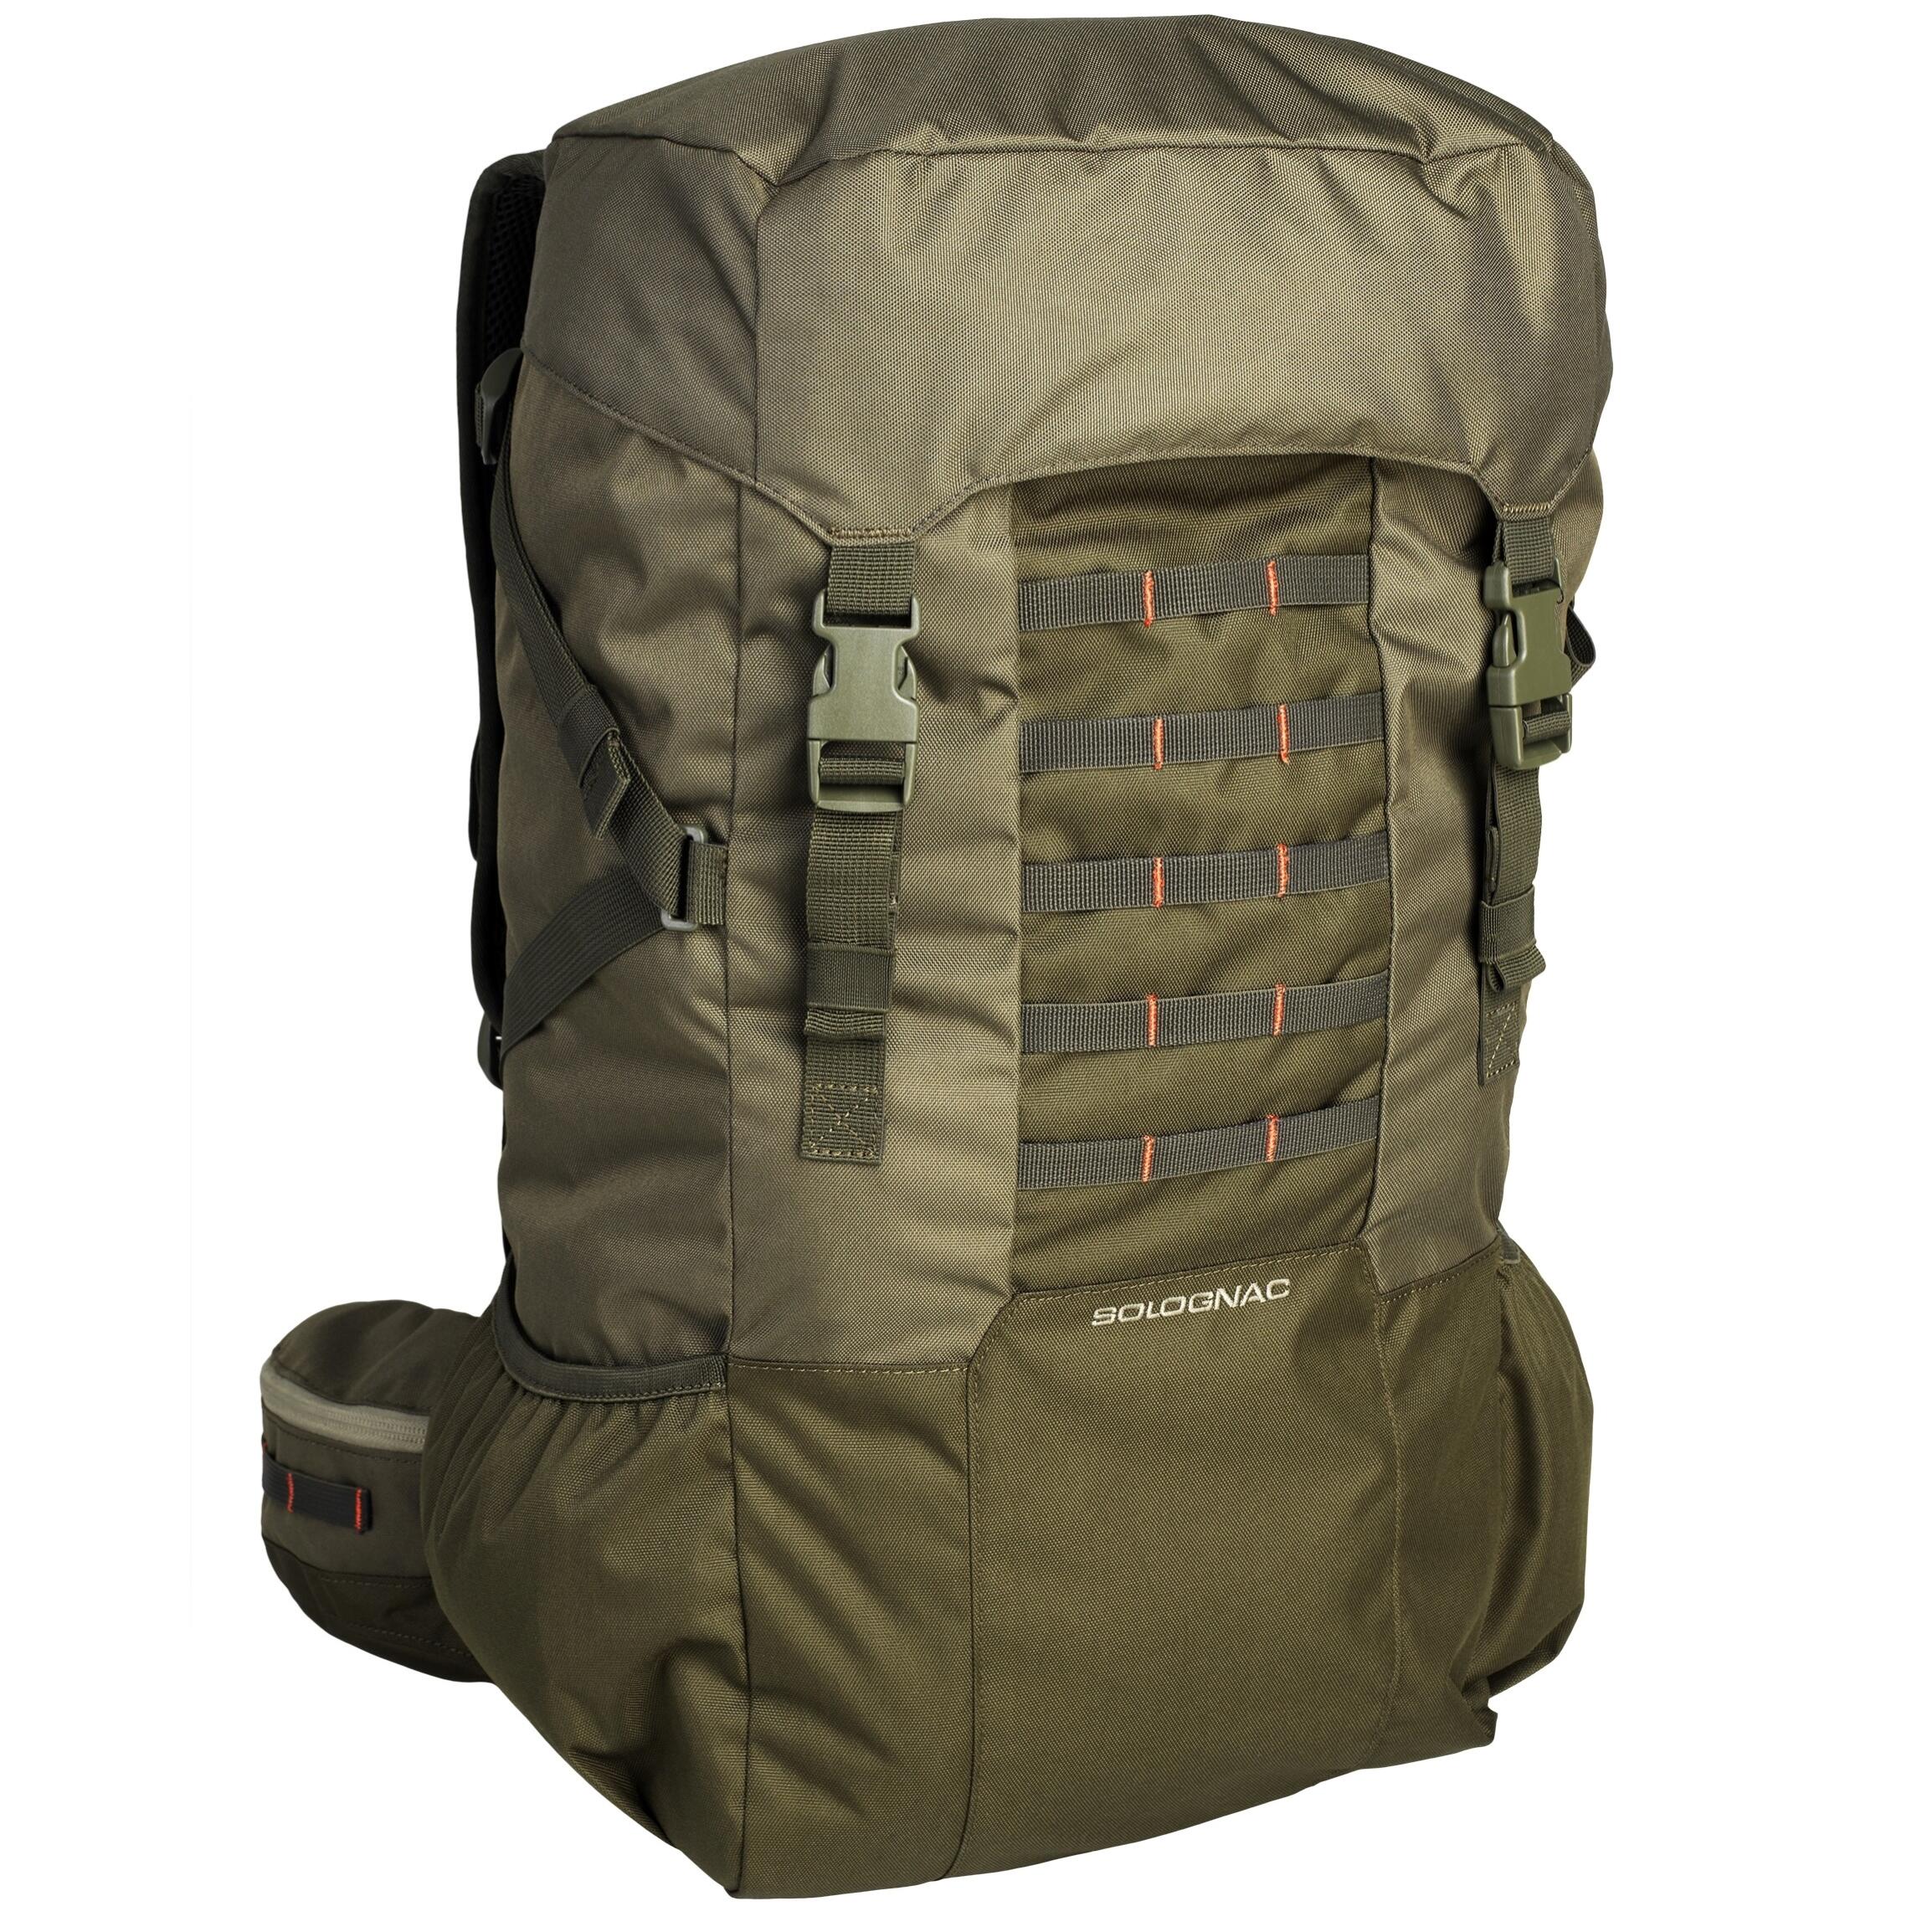 SAC A DOS CHASSE X-ACCESS 50 LITRES VERT - SOLOGNAC